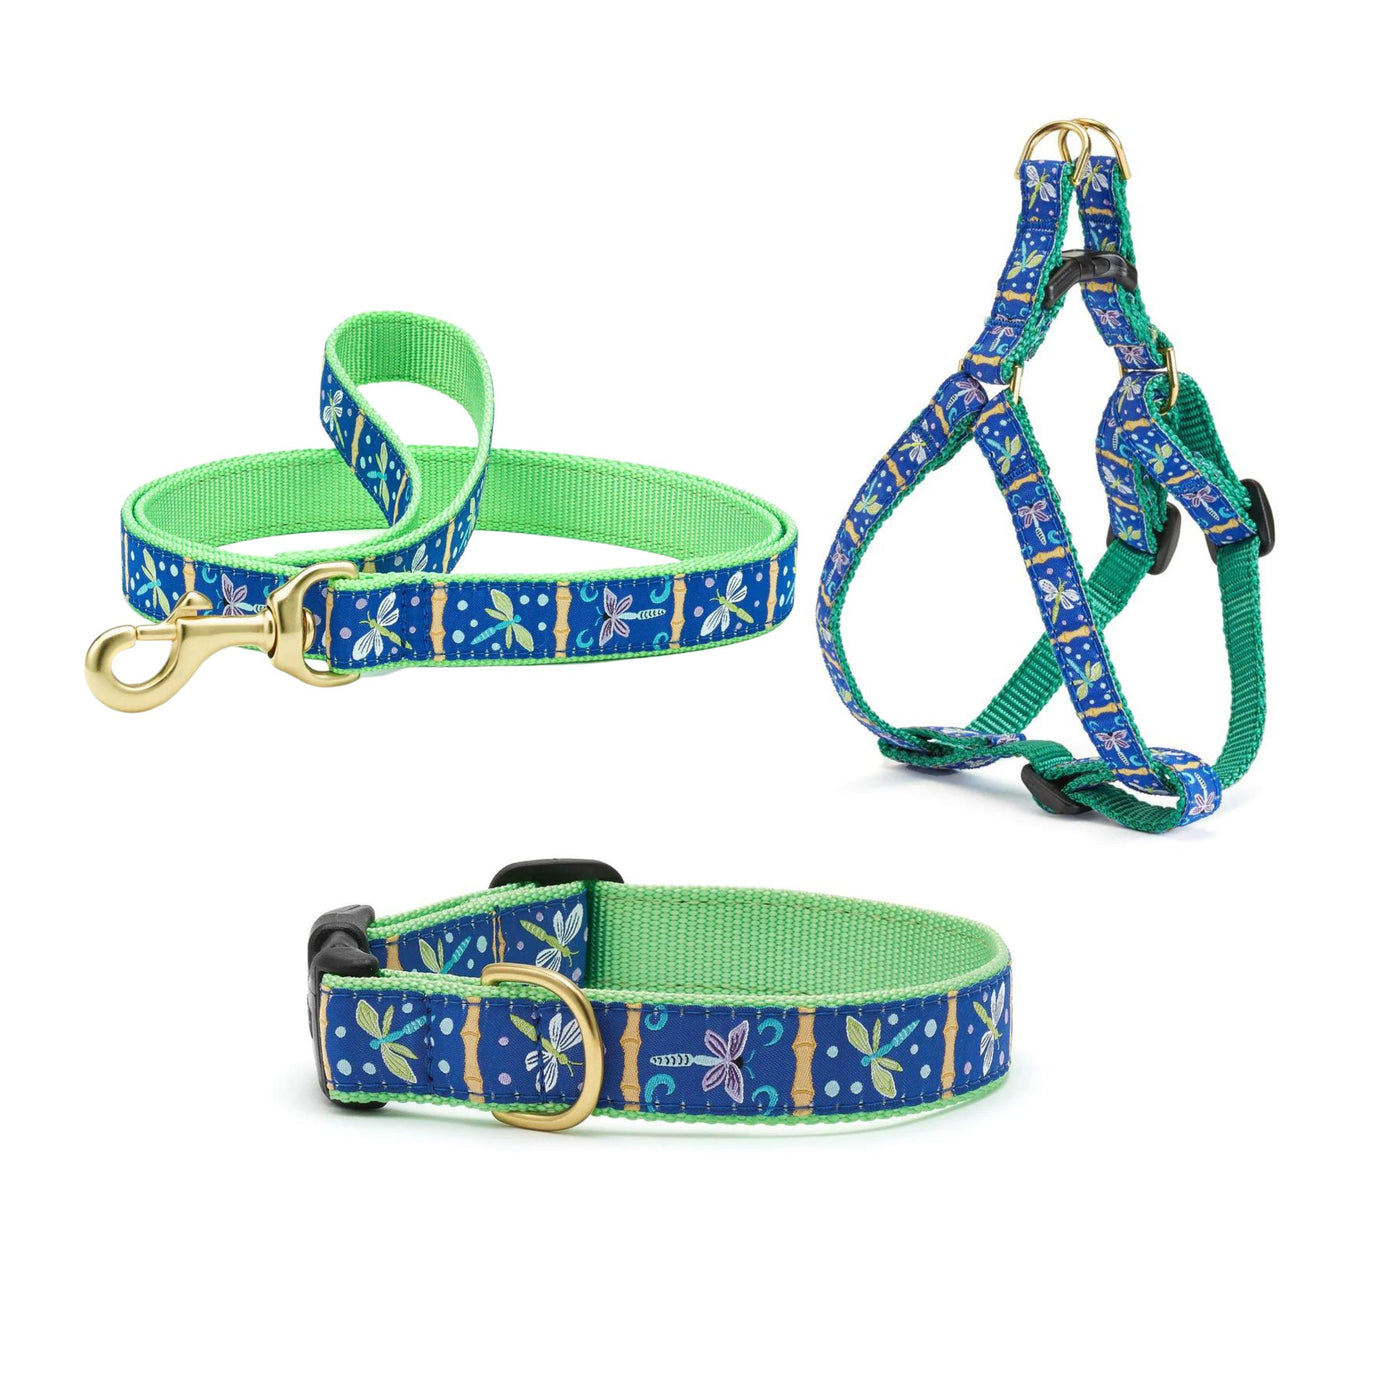 Dragonfly Dog Collar, Leash and Optional Harness